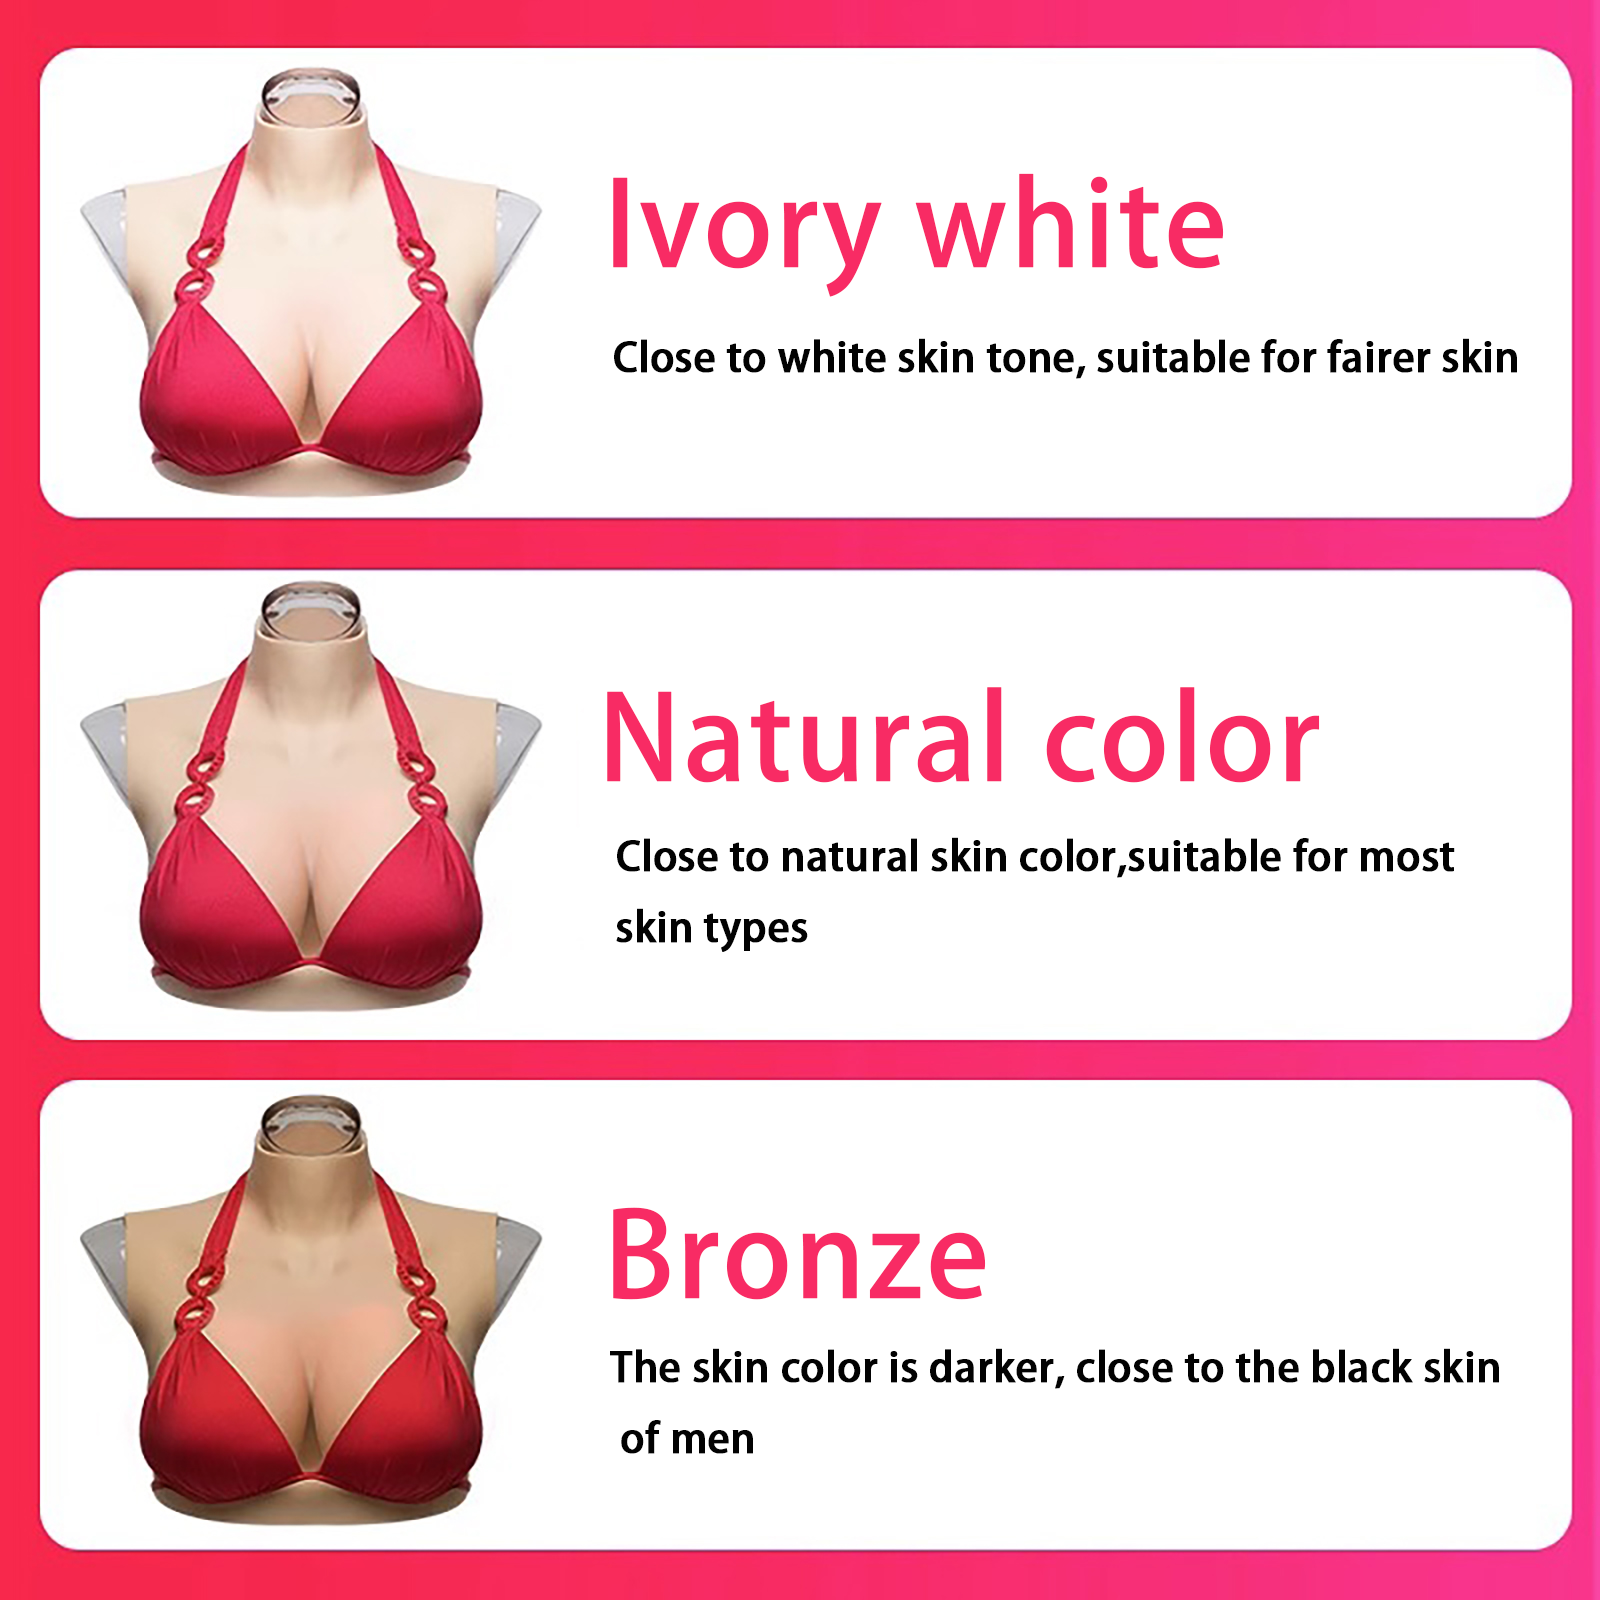 C Cup high neck silicone breasts